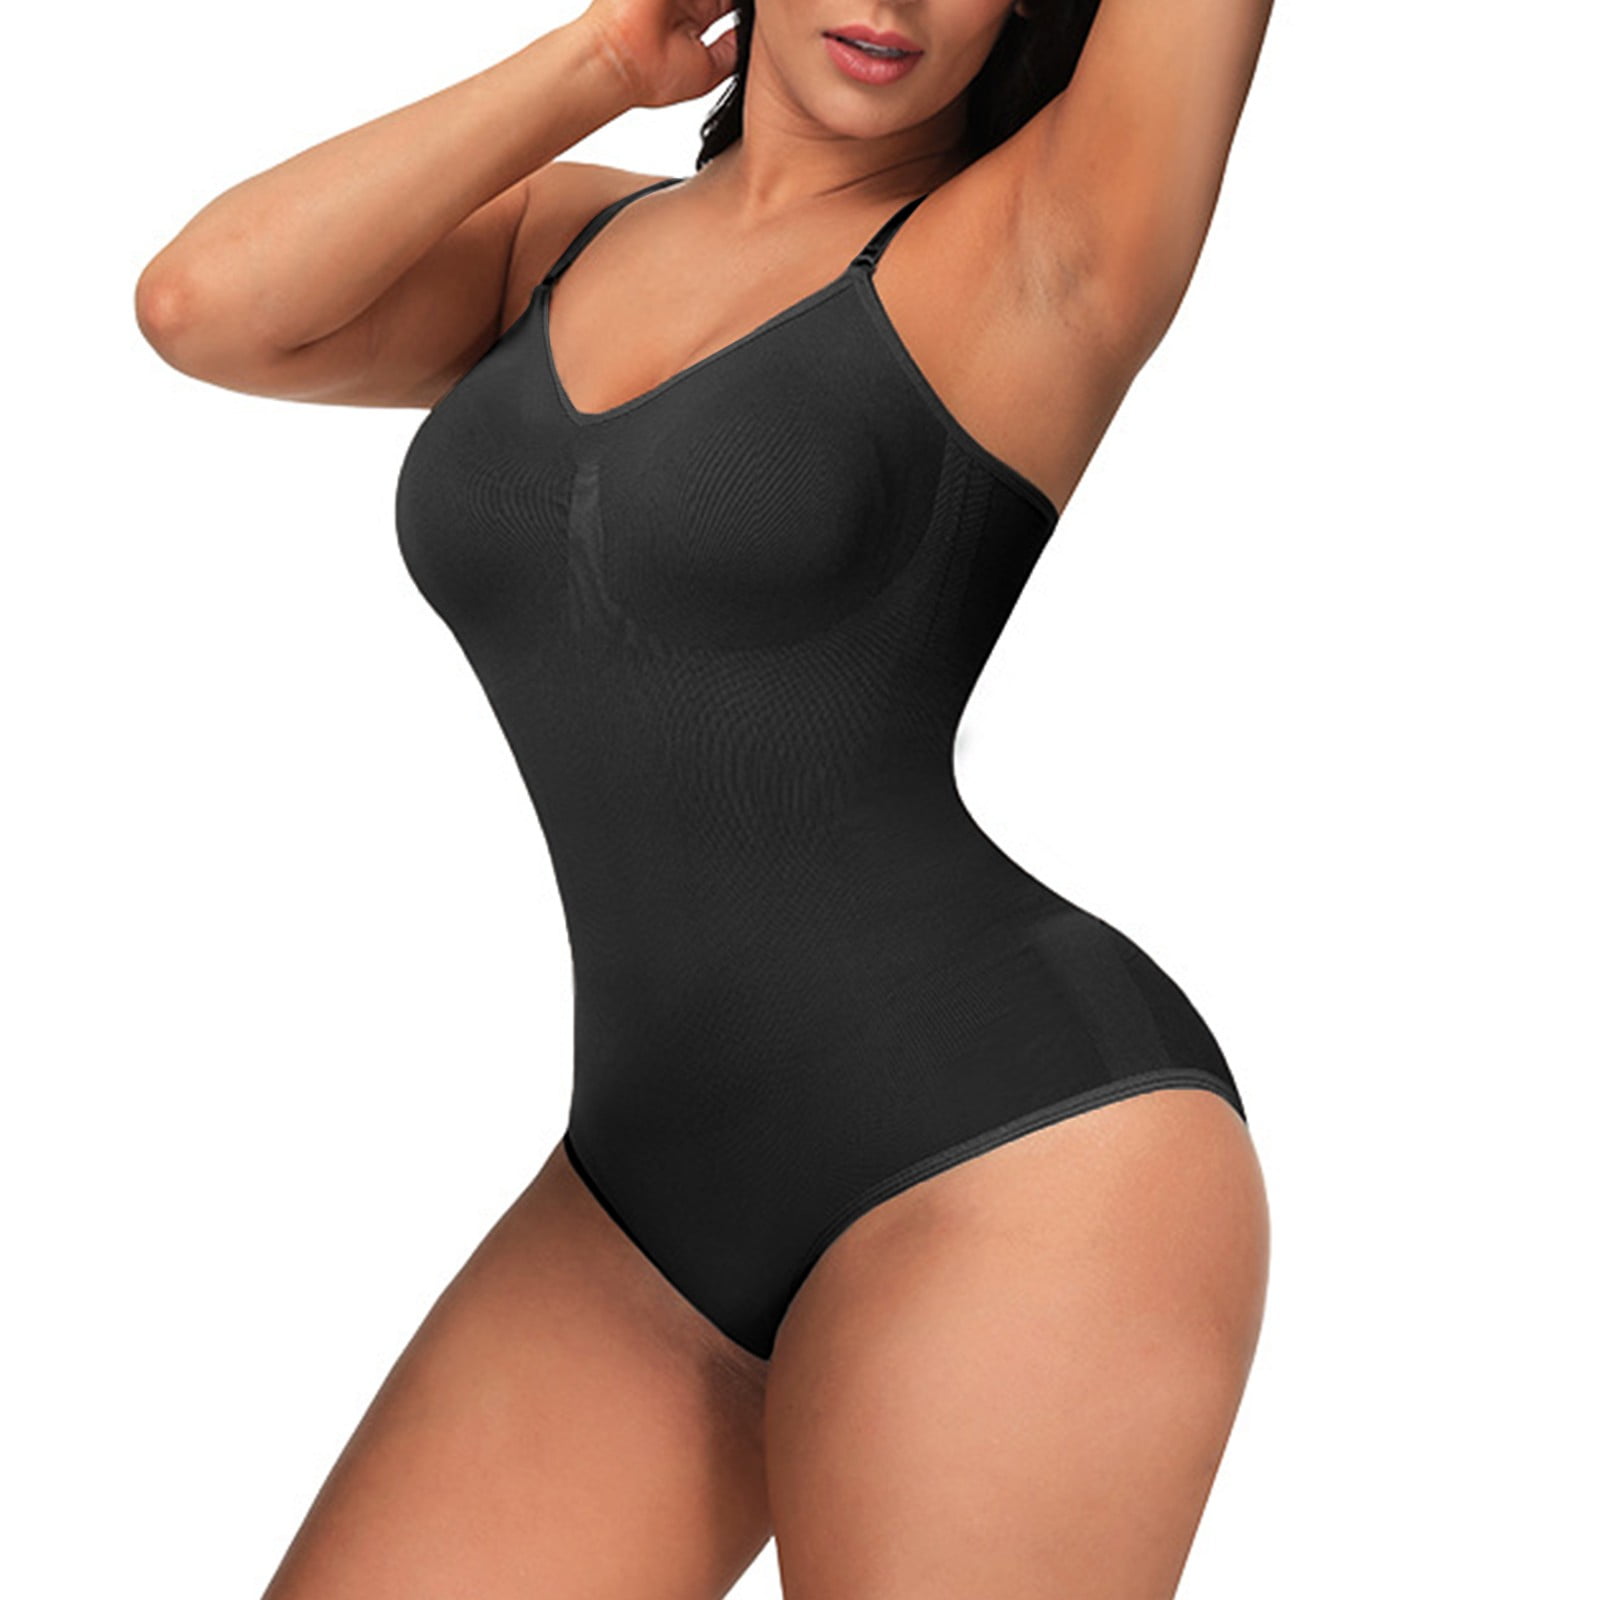 Maidenform Womens Flexees Embellished Firm Control Bodysuit Style-1456